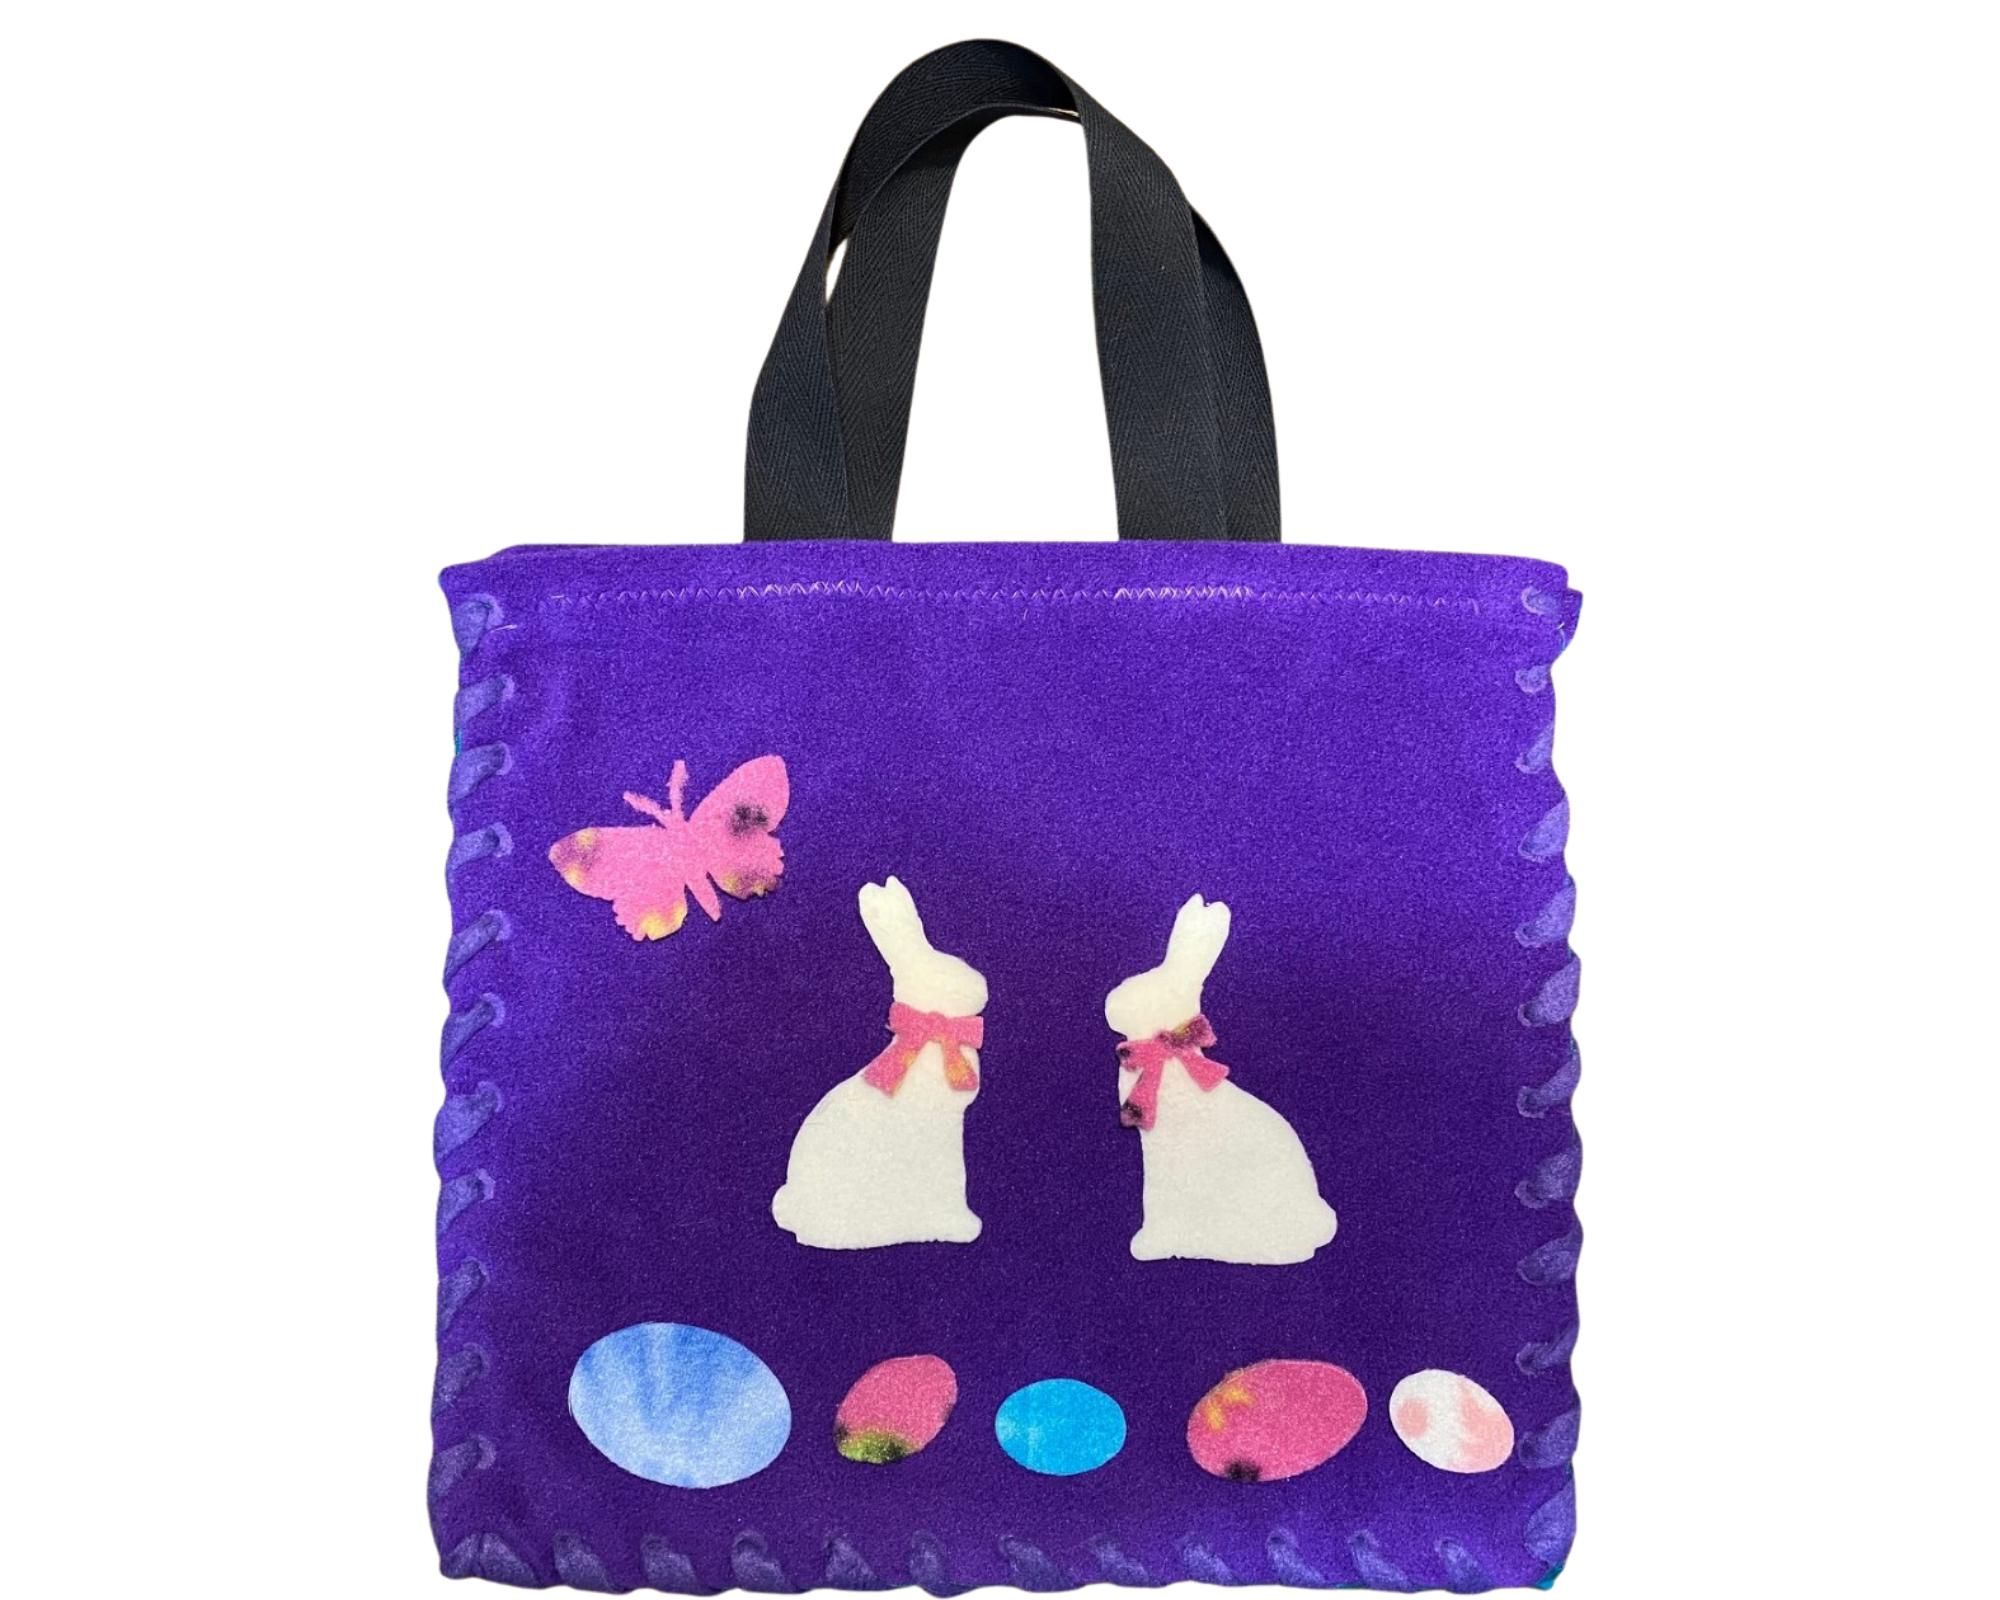 Vibrant purple fleece Easter tote with vibrant green lining, black tote straps, and appliques on front including two white bunnies, a multi colored butterfly and multicolored Easter Eggs displayed on front.